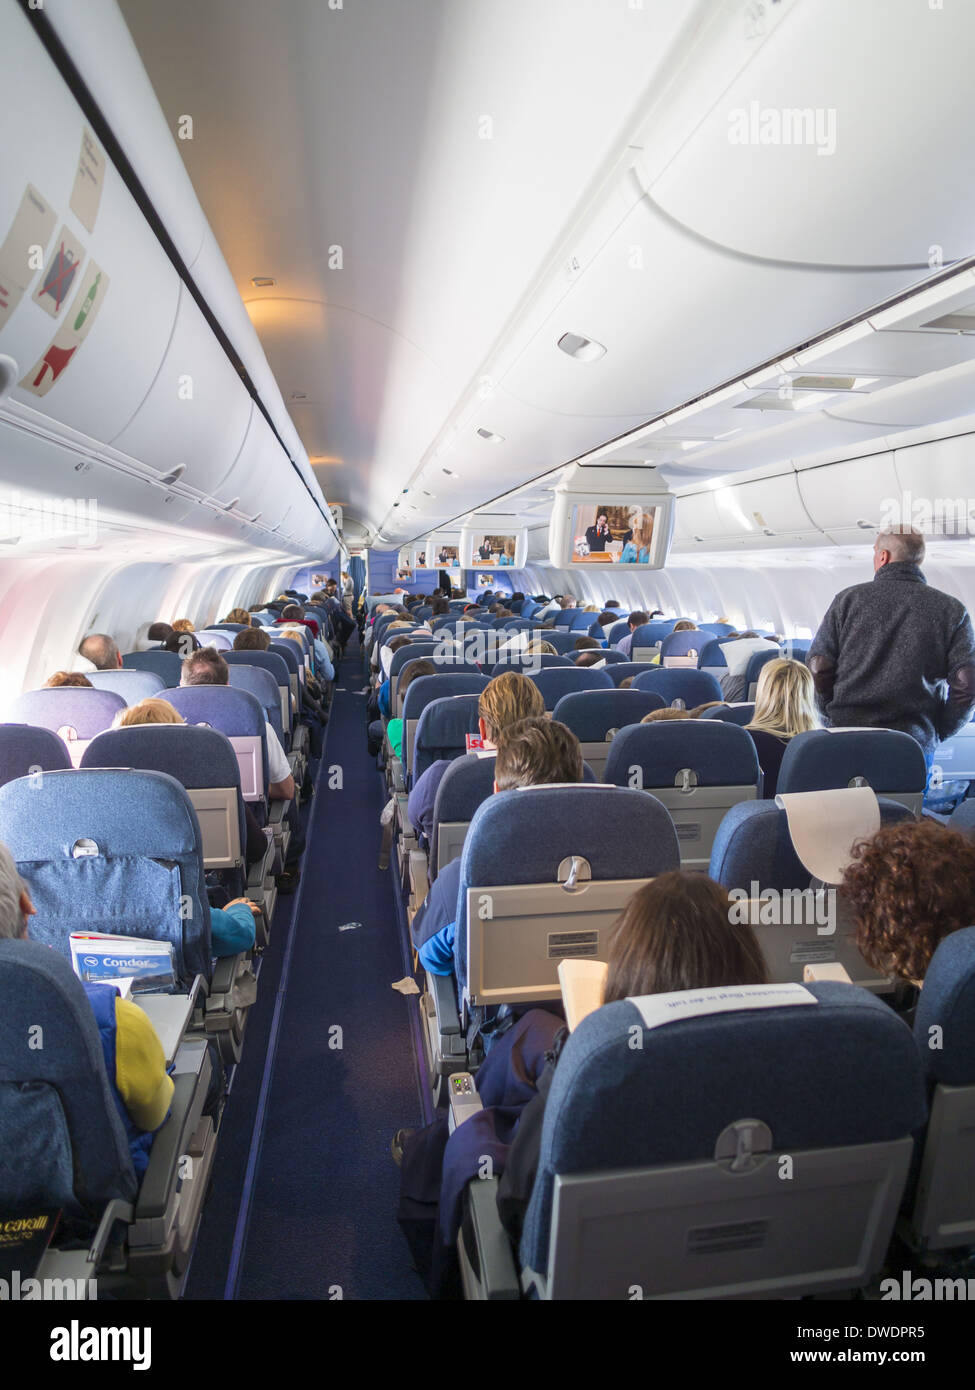 Cabin of aircraft Boing 767 with passengers Stock Photo